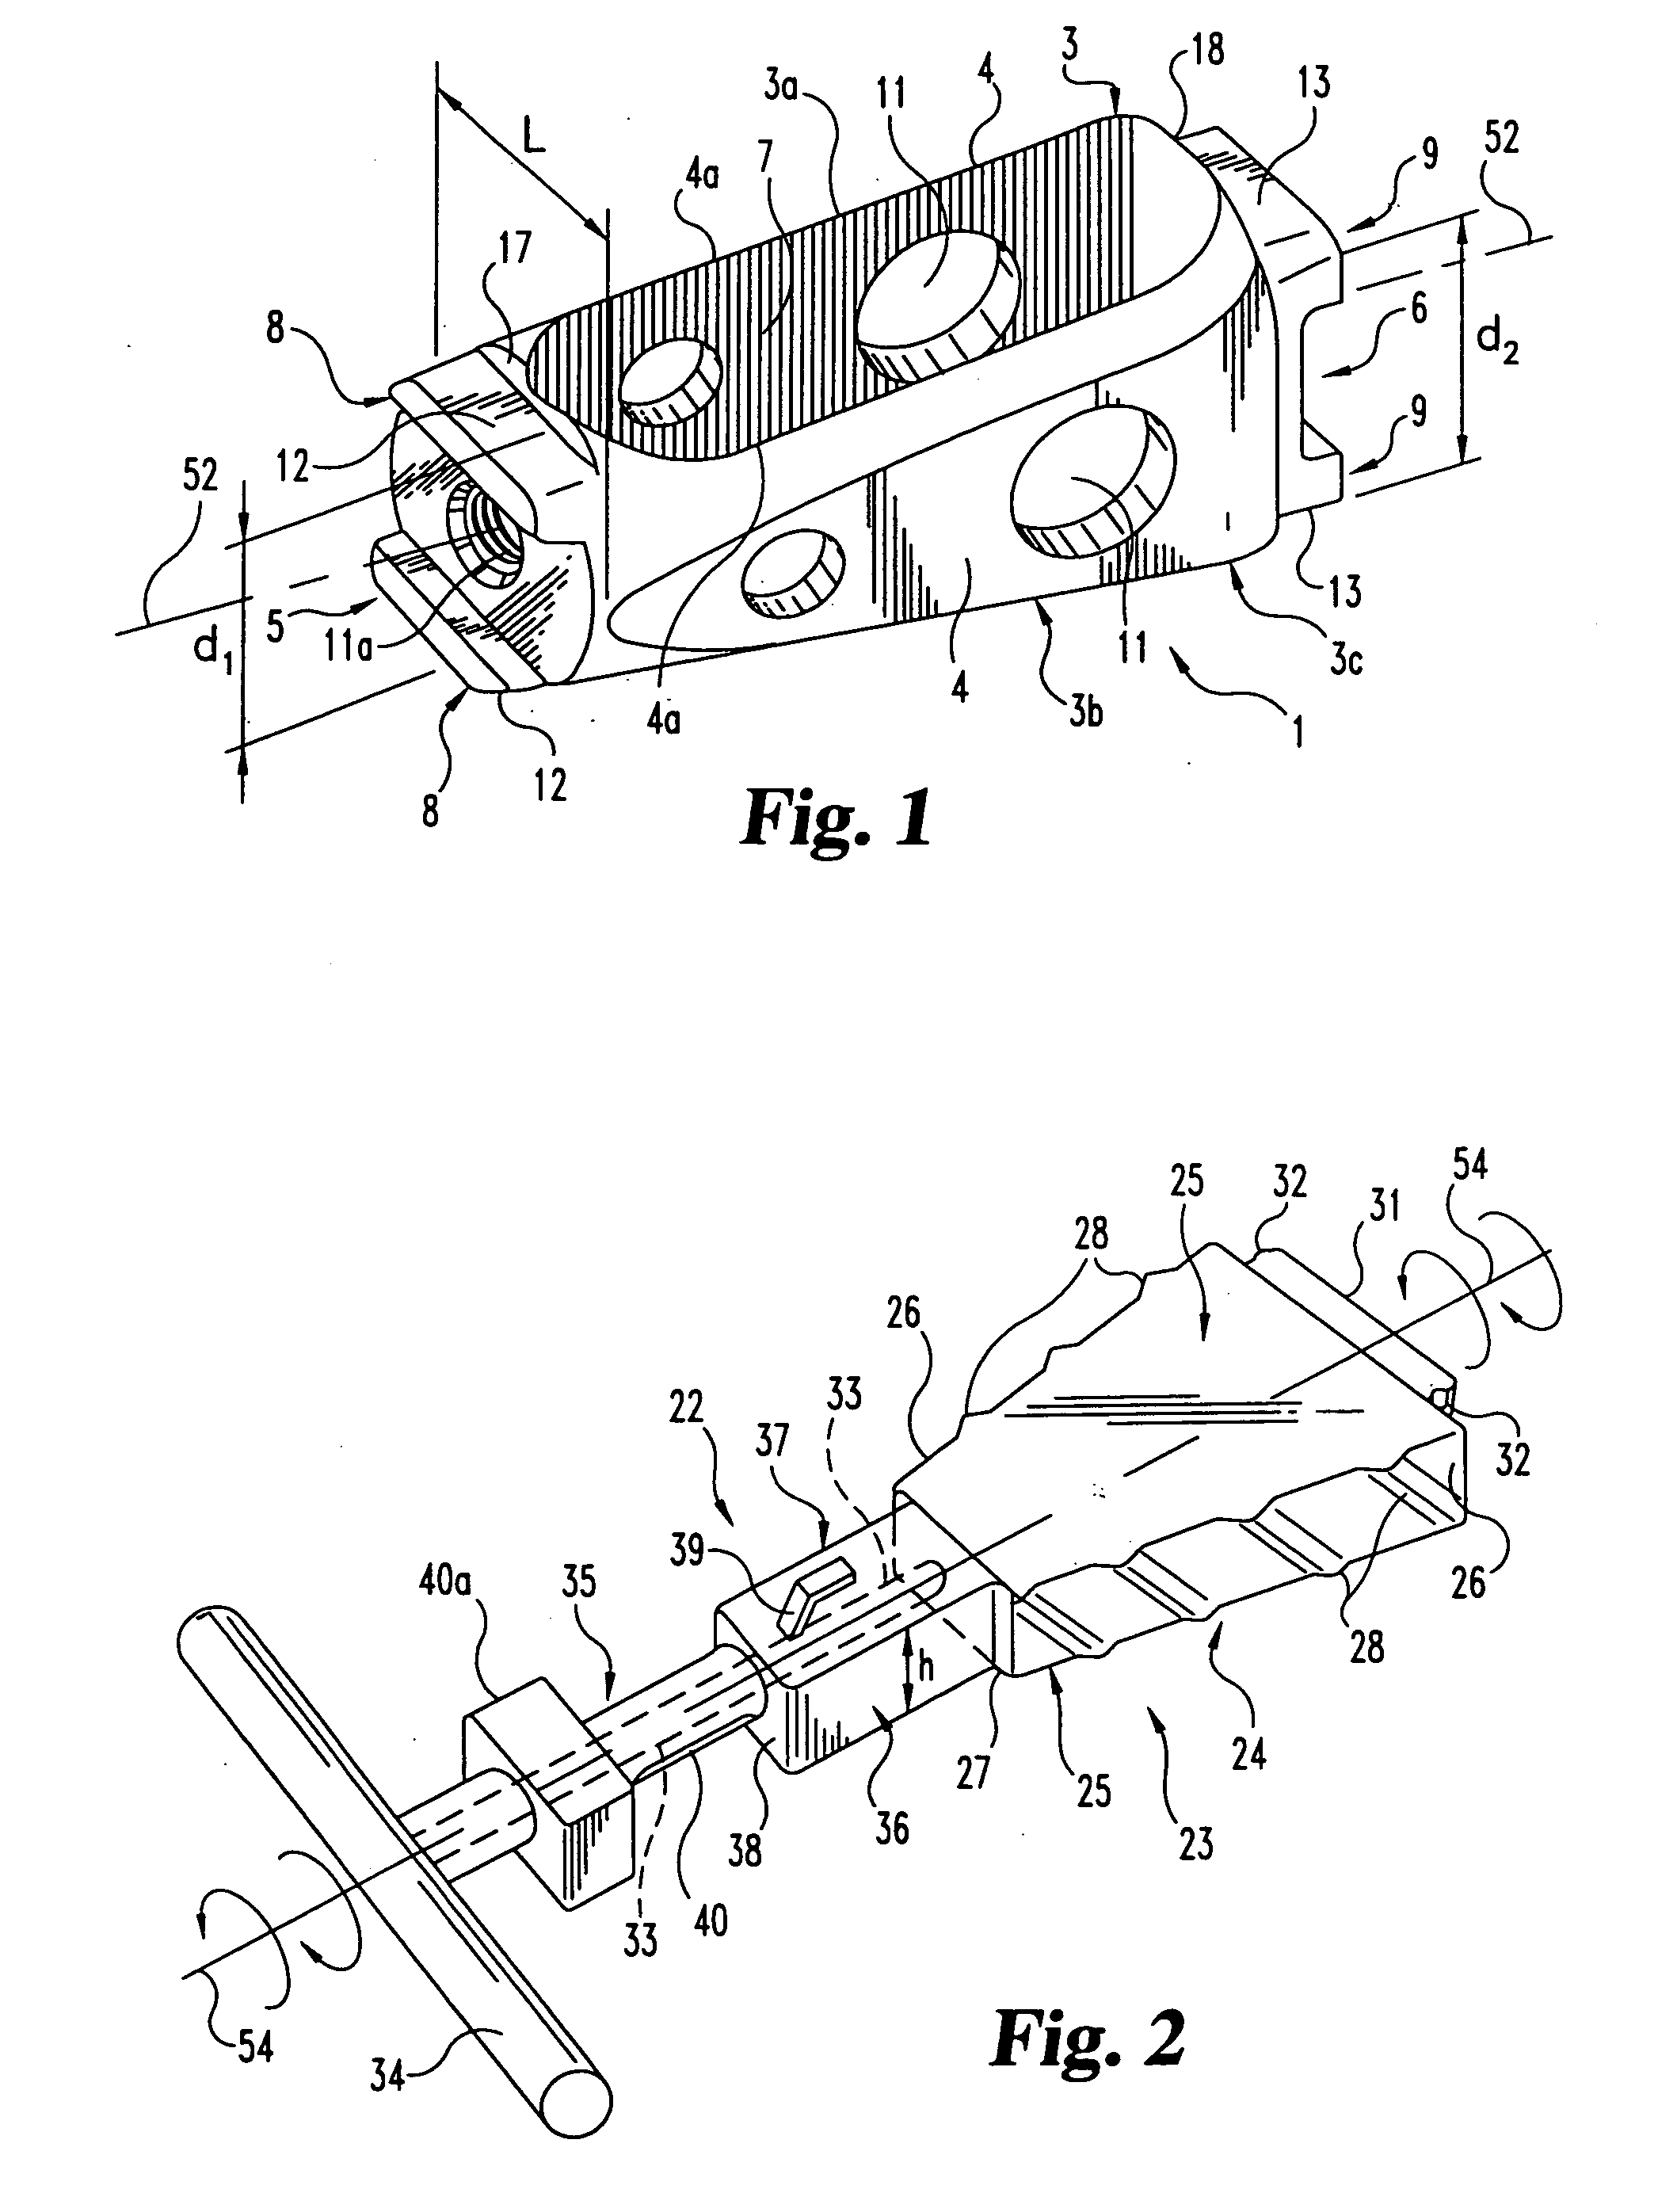 Spinal implant and cutting tool preparation accessory for mounting the implant